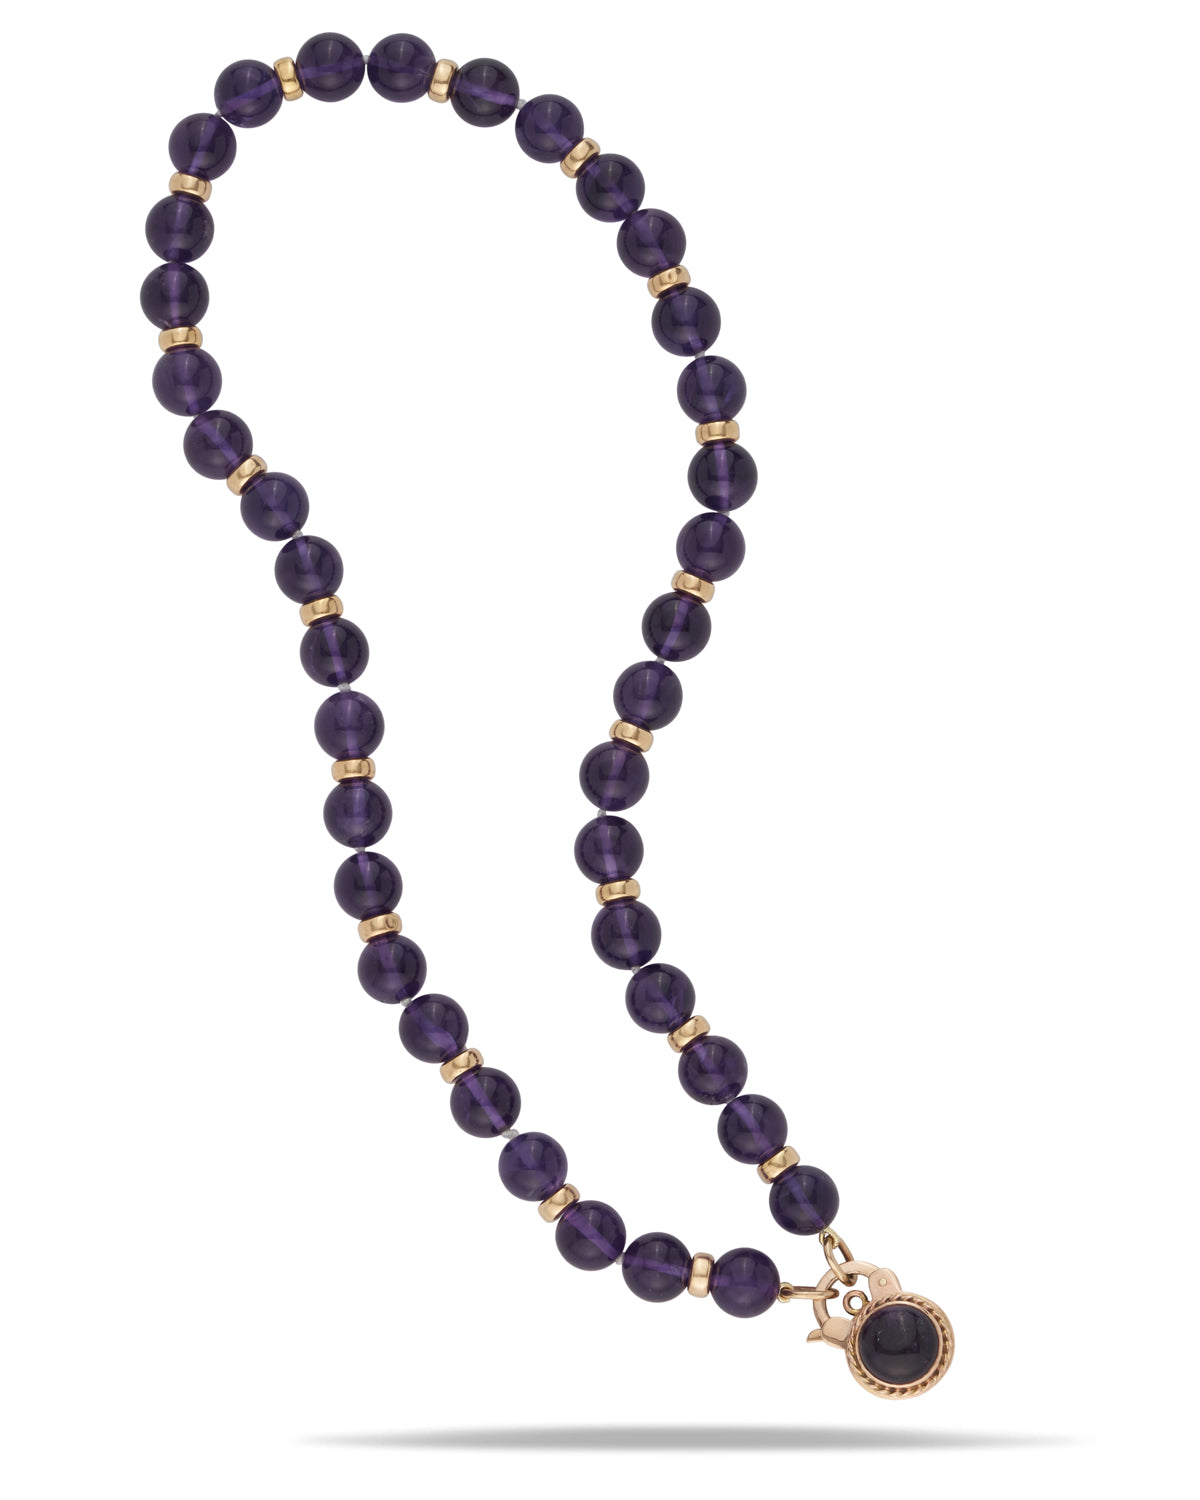 Vintage amethyst & gold bead necklace with gold clasp, 1980's. 